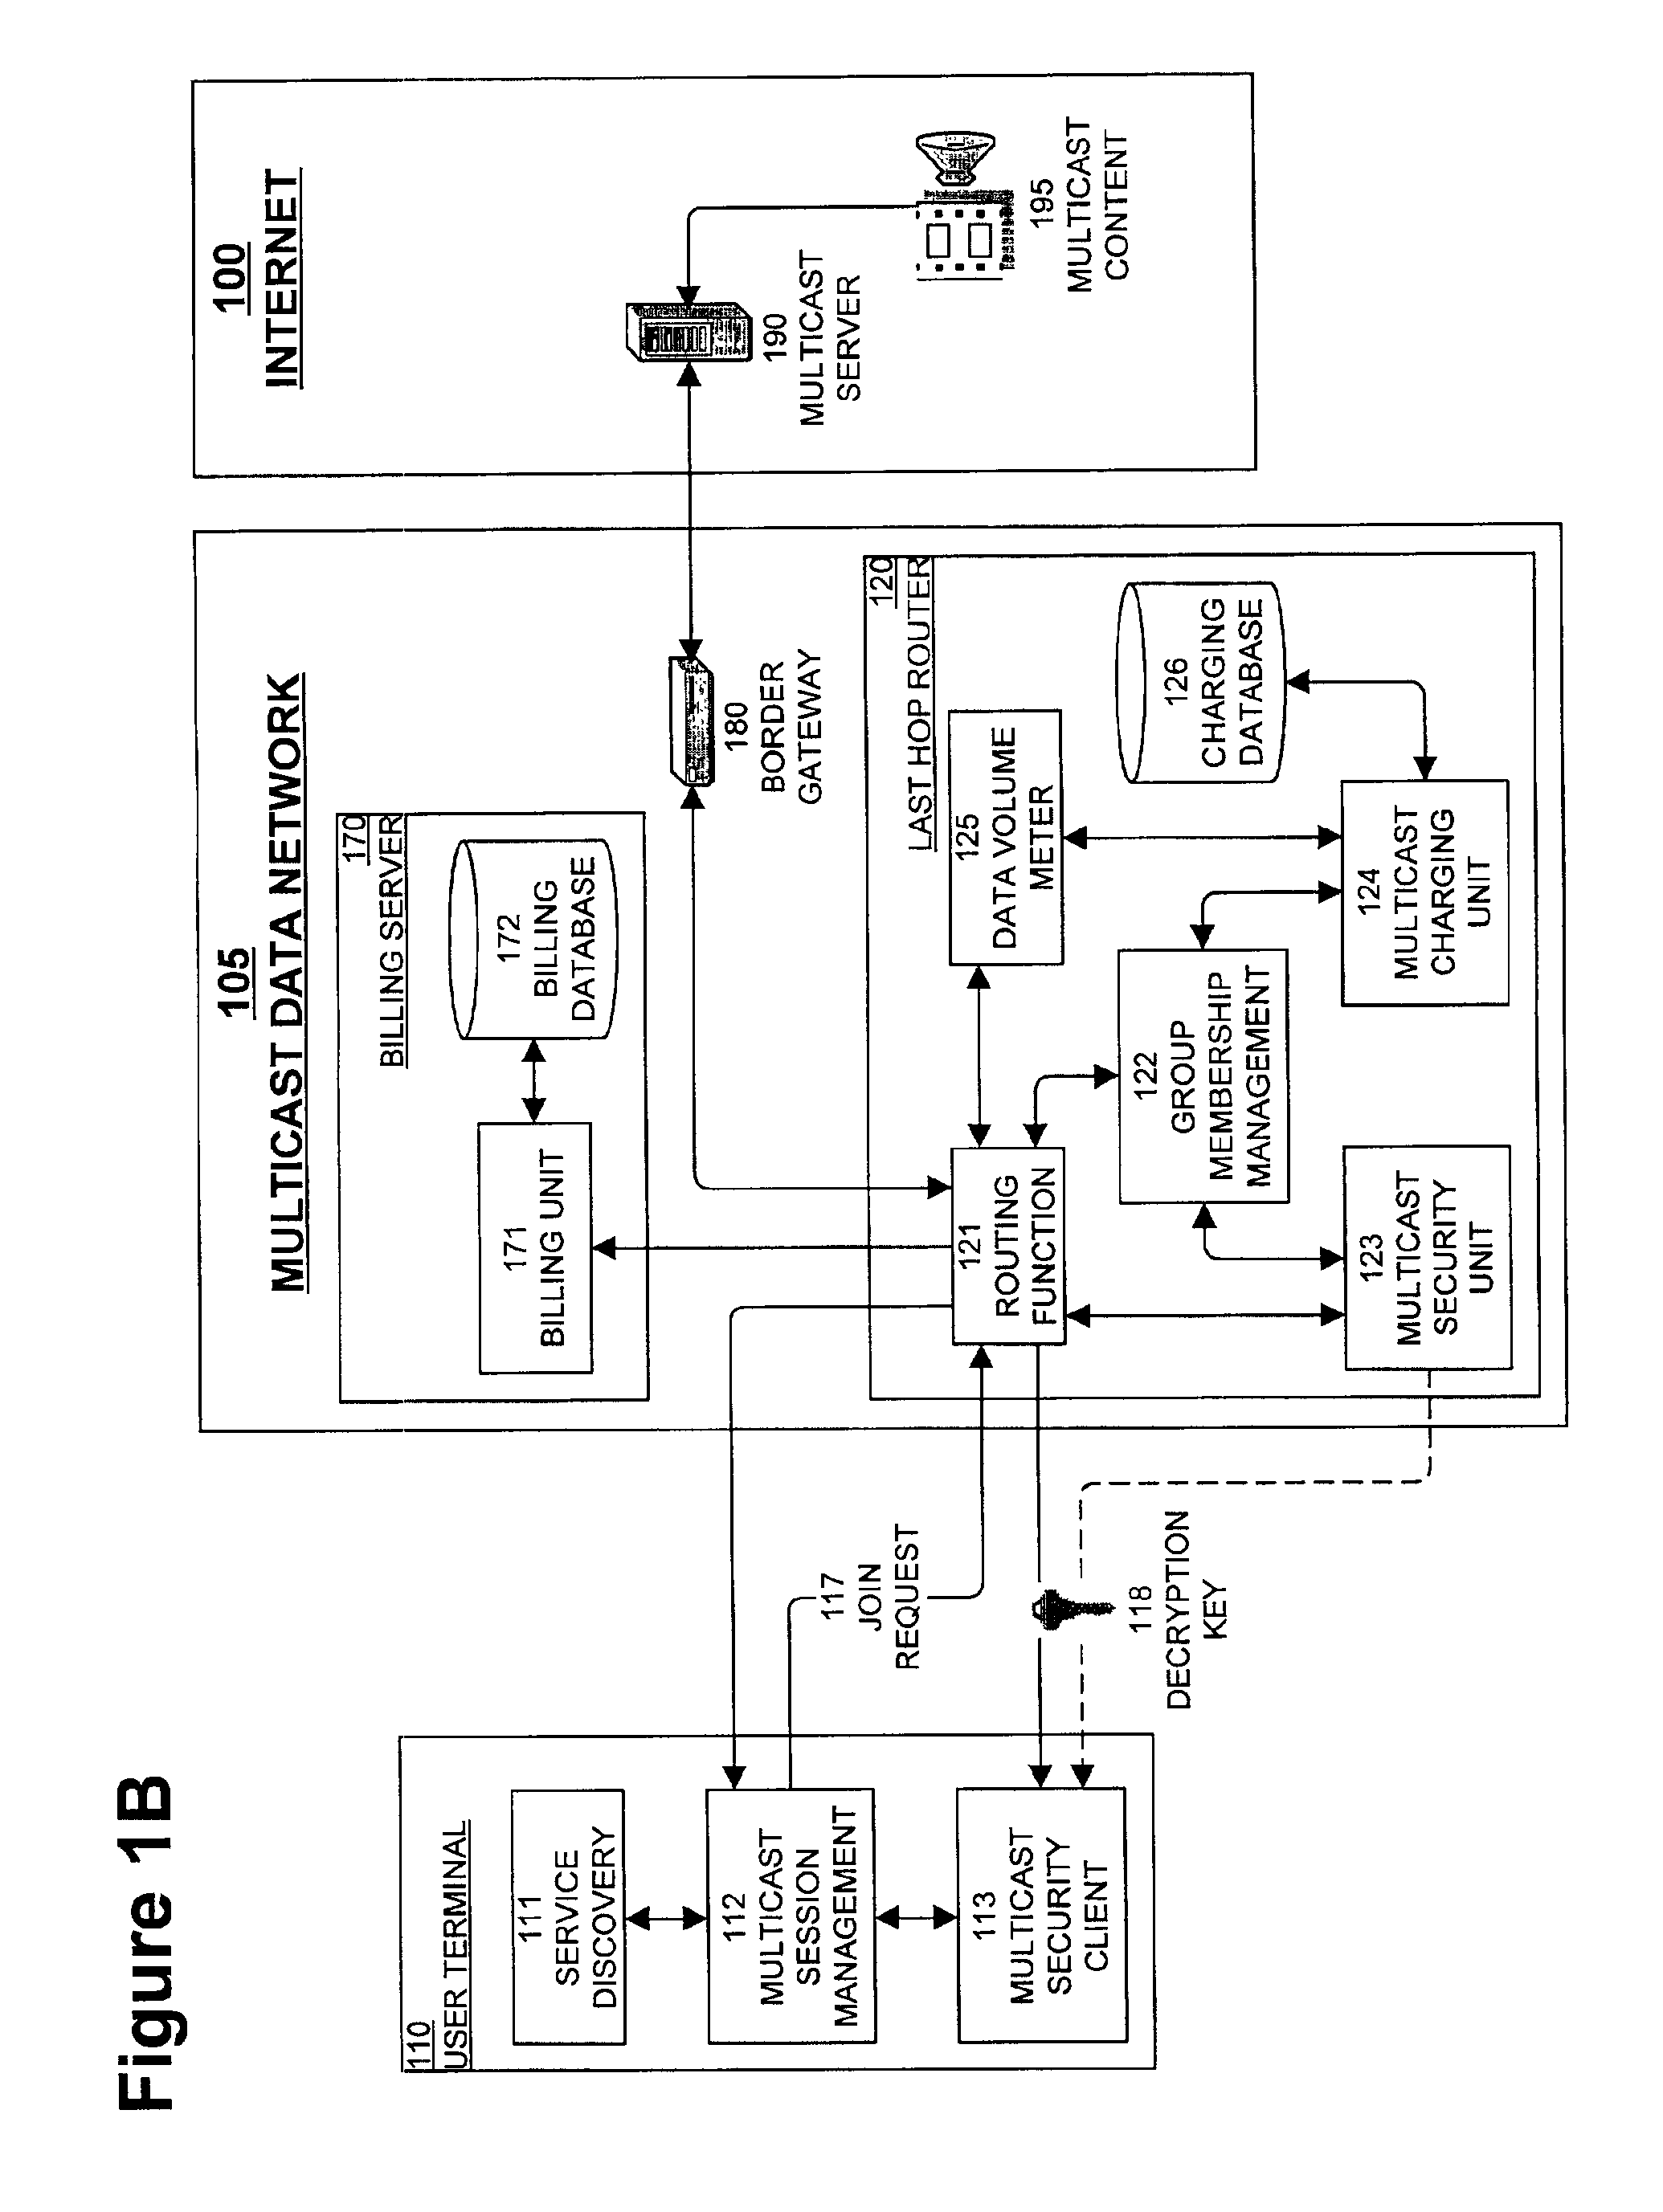 Charging mechanism for multicasting